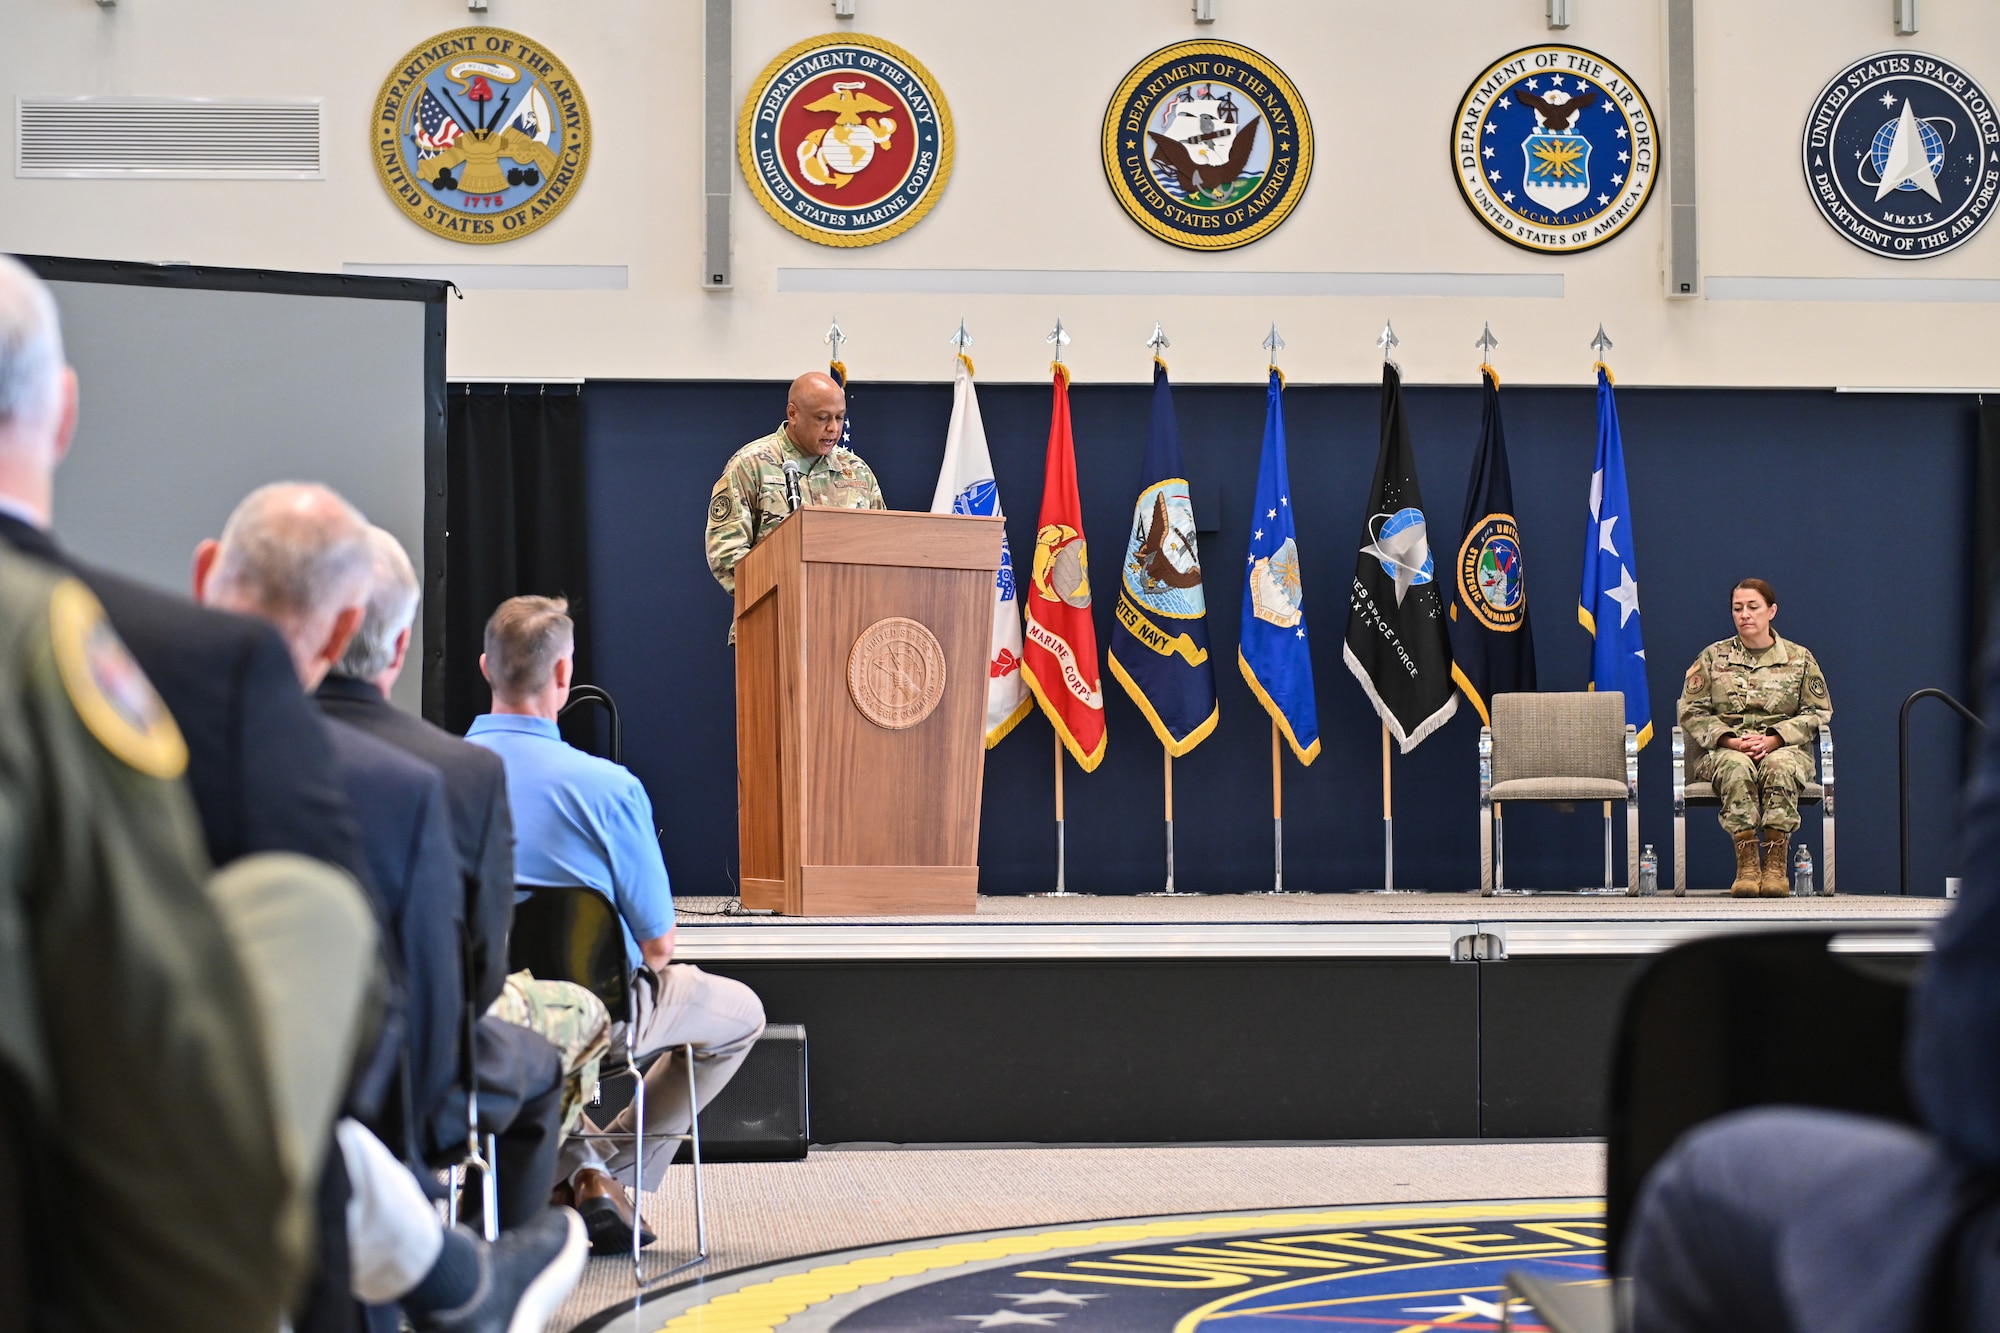 U.S. Strategic Command (USSTRATCOM) officially stood up the Joint Electromagnetic Spectrum (EMS) Operations Center (JEC) during a ceremony at USSTRATCOM today.
The JEC will serve as the heart of the Department of Defense's Electromagnetic Spectrum Operations with the primary goal of restructuring accounts for force management, planning, situation monitoring, decision-making, and force direction.